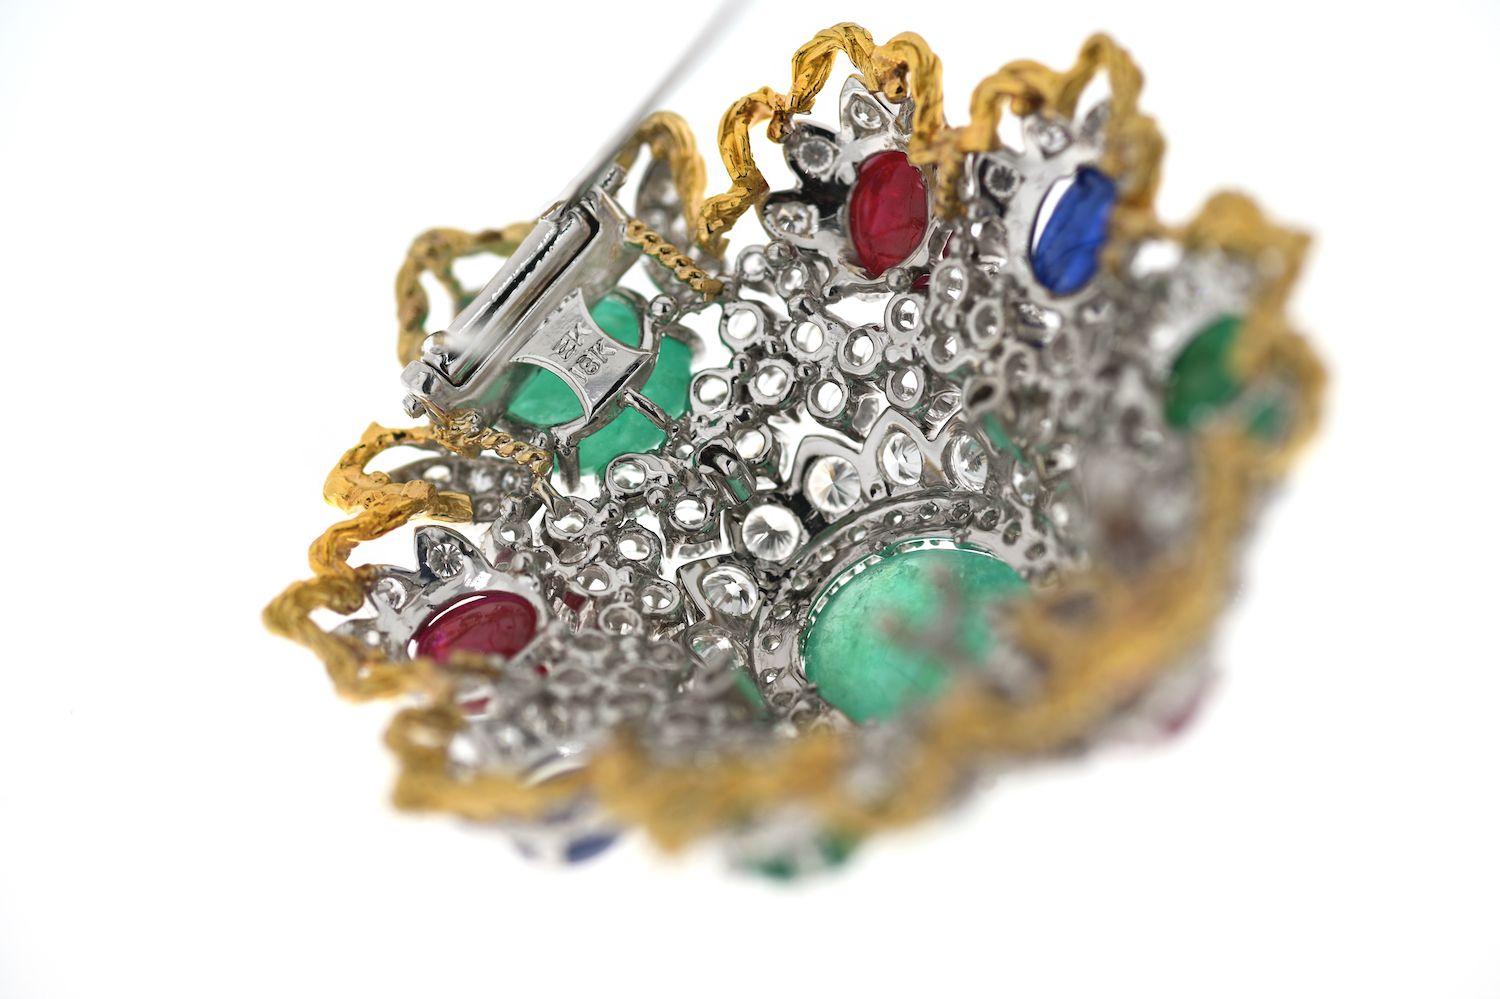 Emerald Cut Diamond And Gemstones Heraldic Brooch from 1970's For Sale